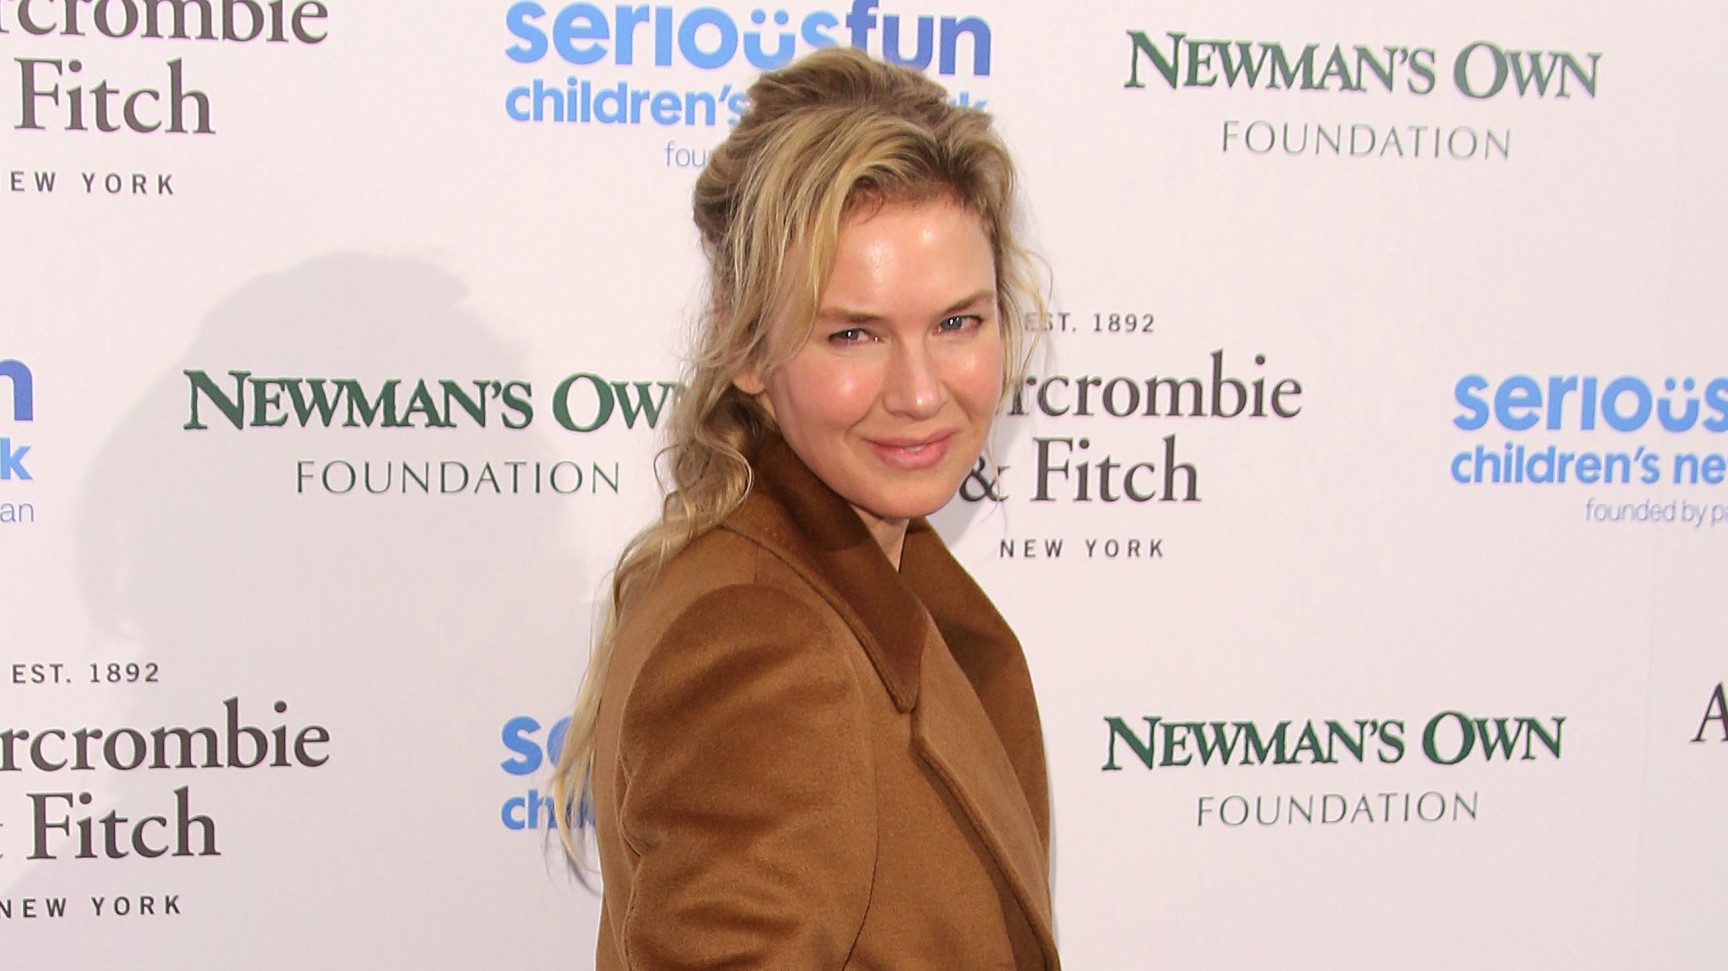 Renée zellweger takes on tabloids and the negative fixation on appearance